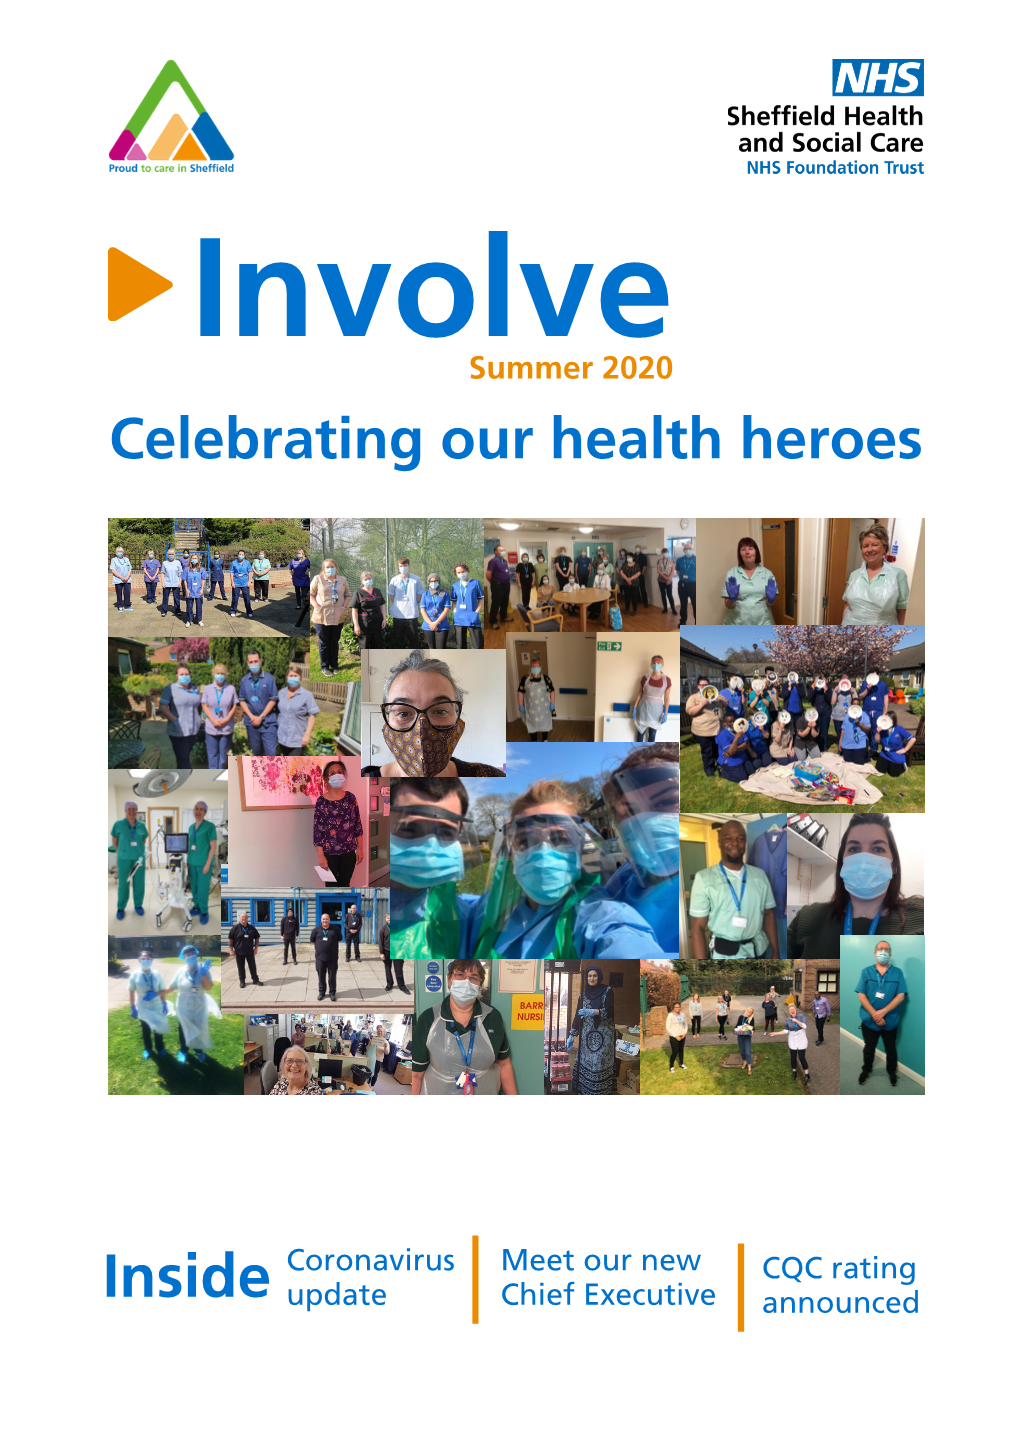 Involve Summer 2020 Celebrating Our Health Heroes